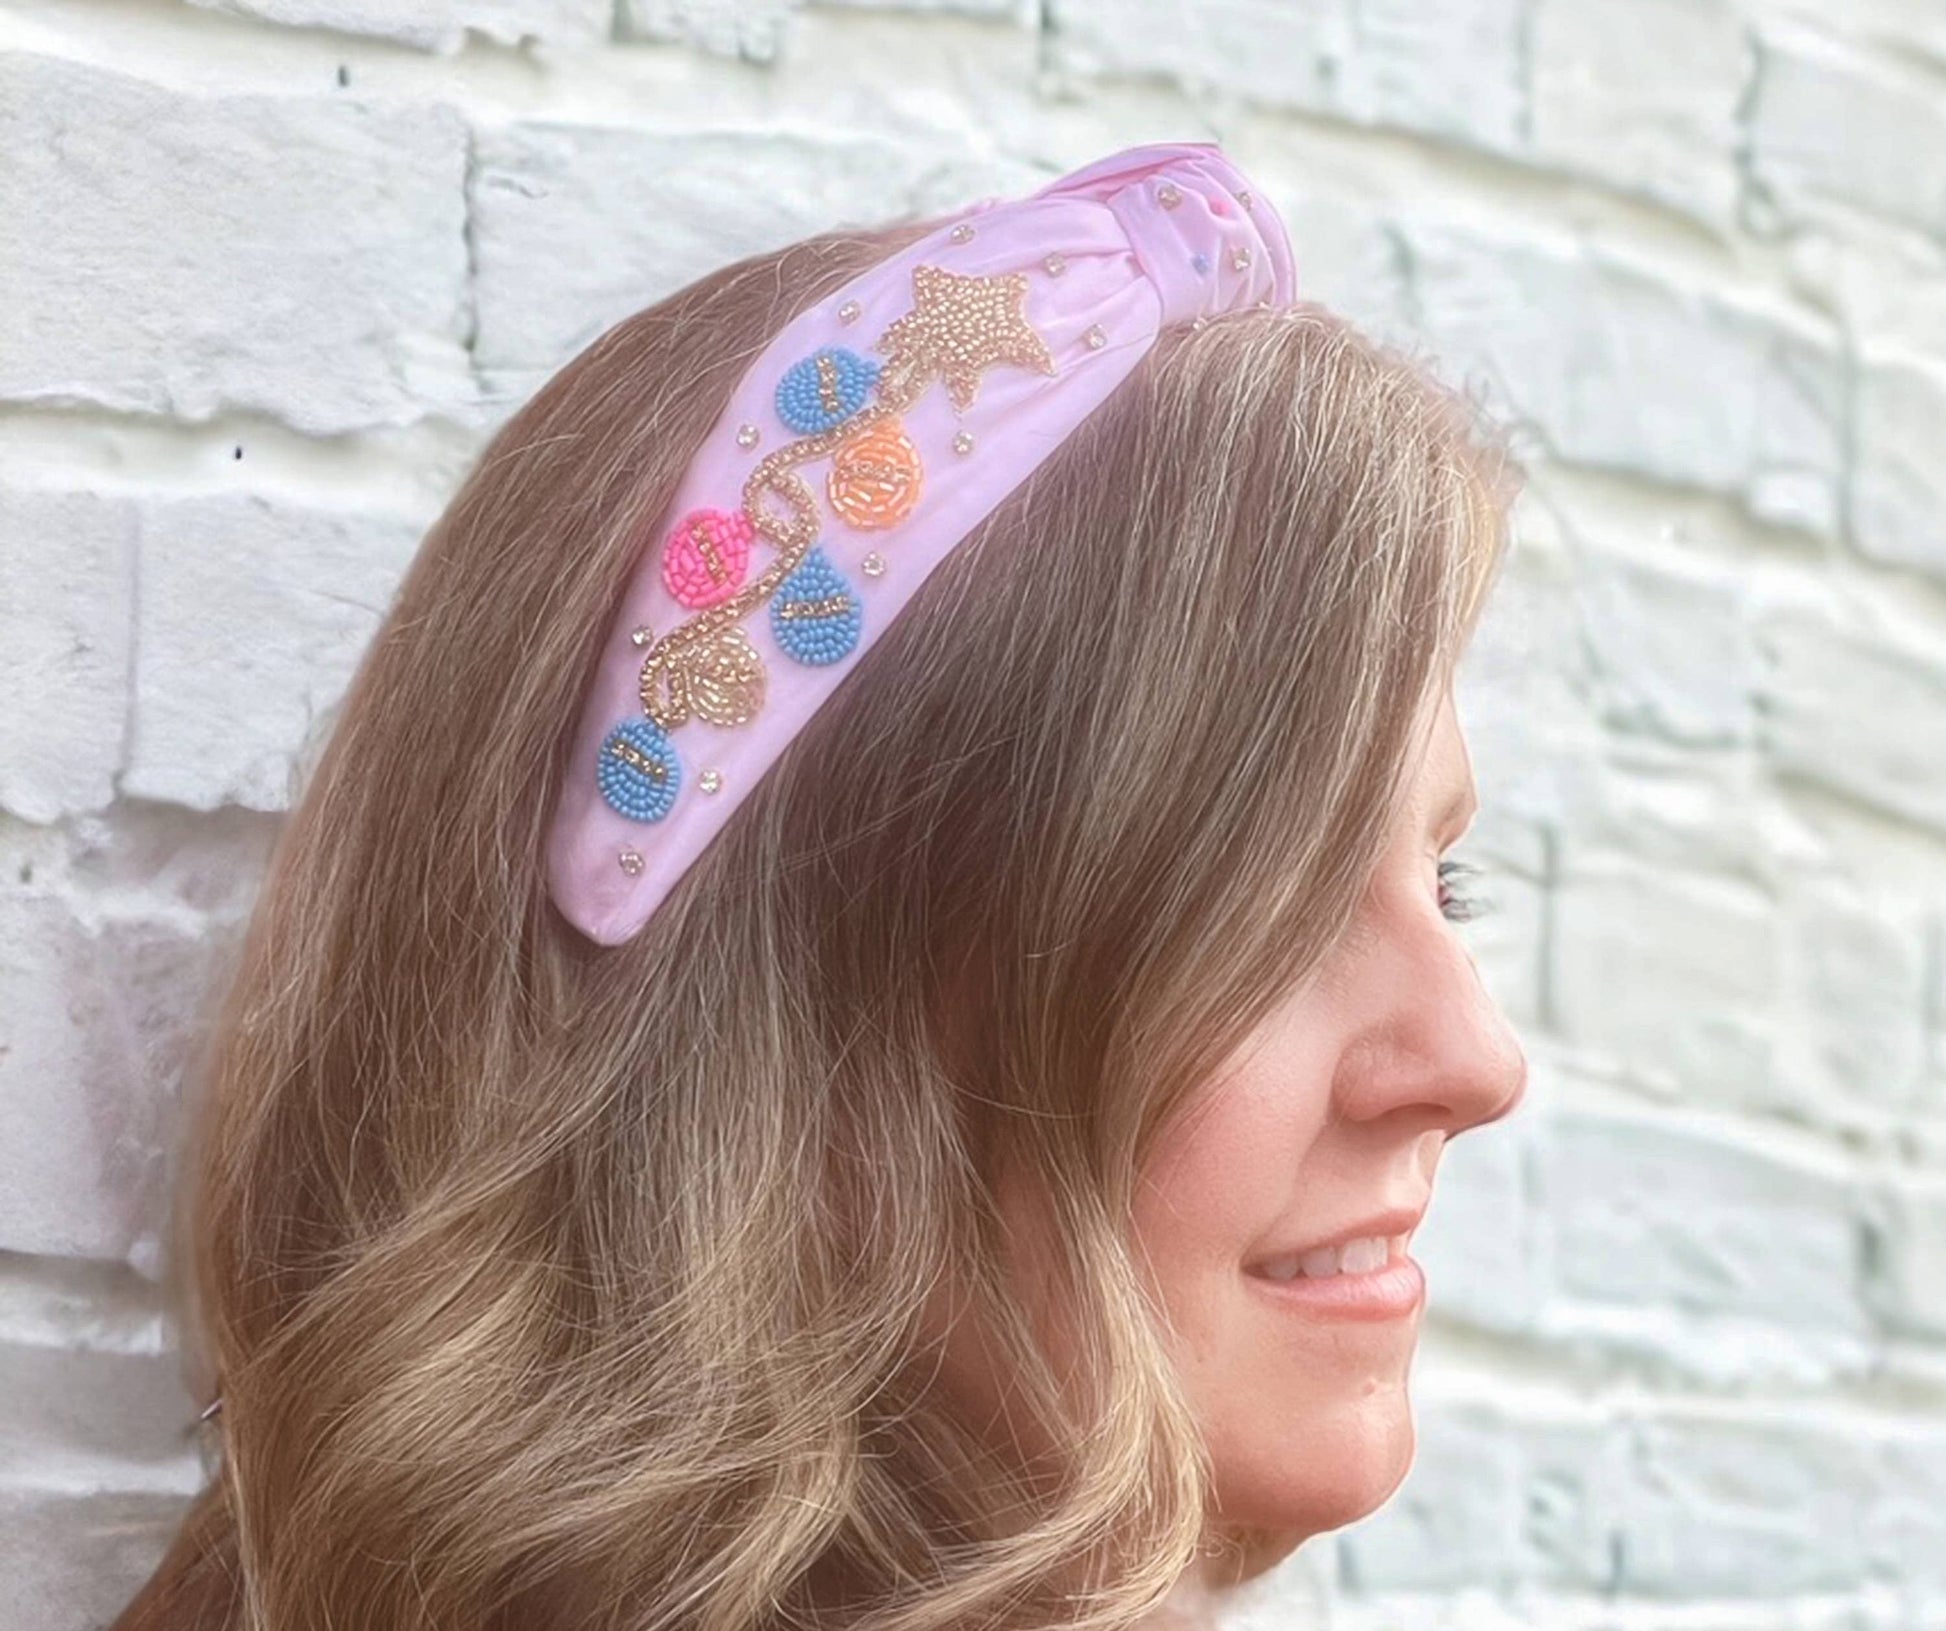 A woman wearing a Bash Beaded Pink Christmas Lights Headband - Festive Holiday Accessories with beaded stars on it.